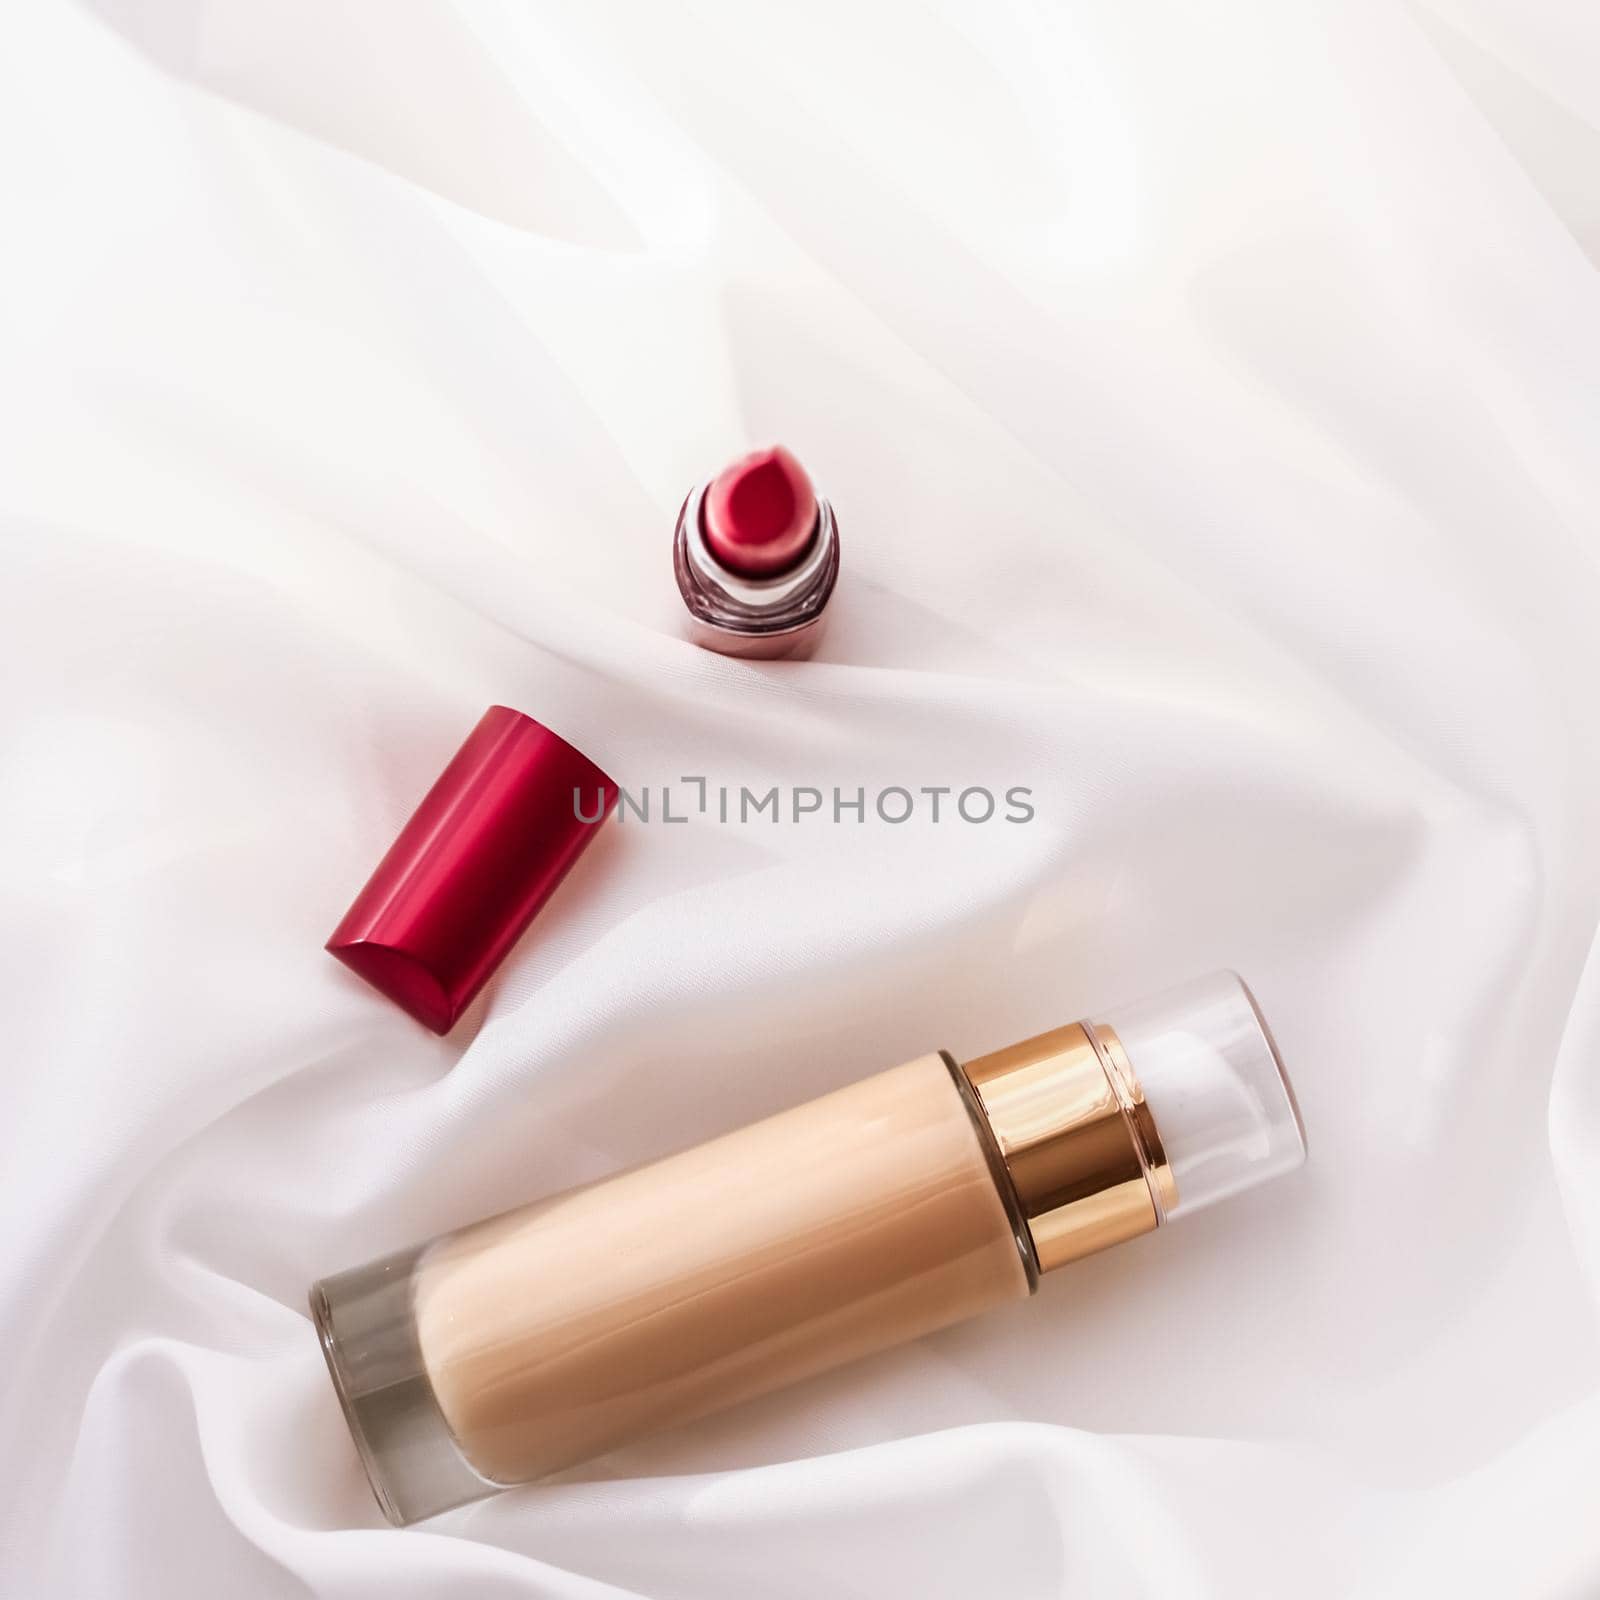 Beige tonal cream bottle make-up fluid foundation base and red lipstick on silk background, cosmetics products as luxury beauty brand holiday design by Anneleven